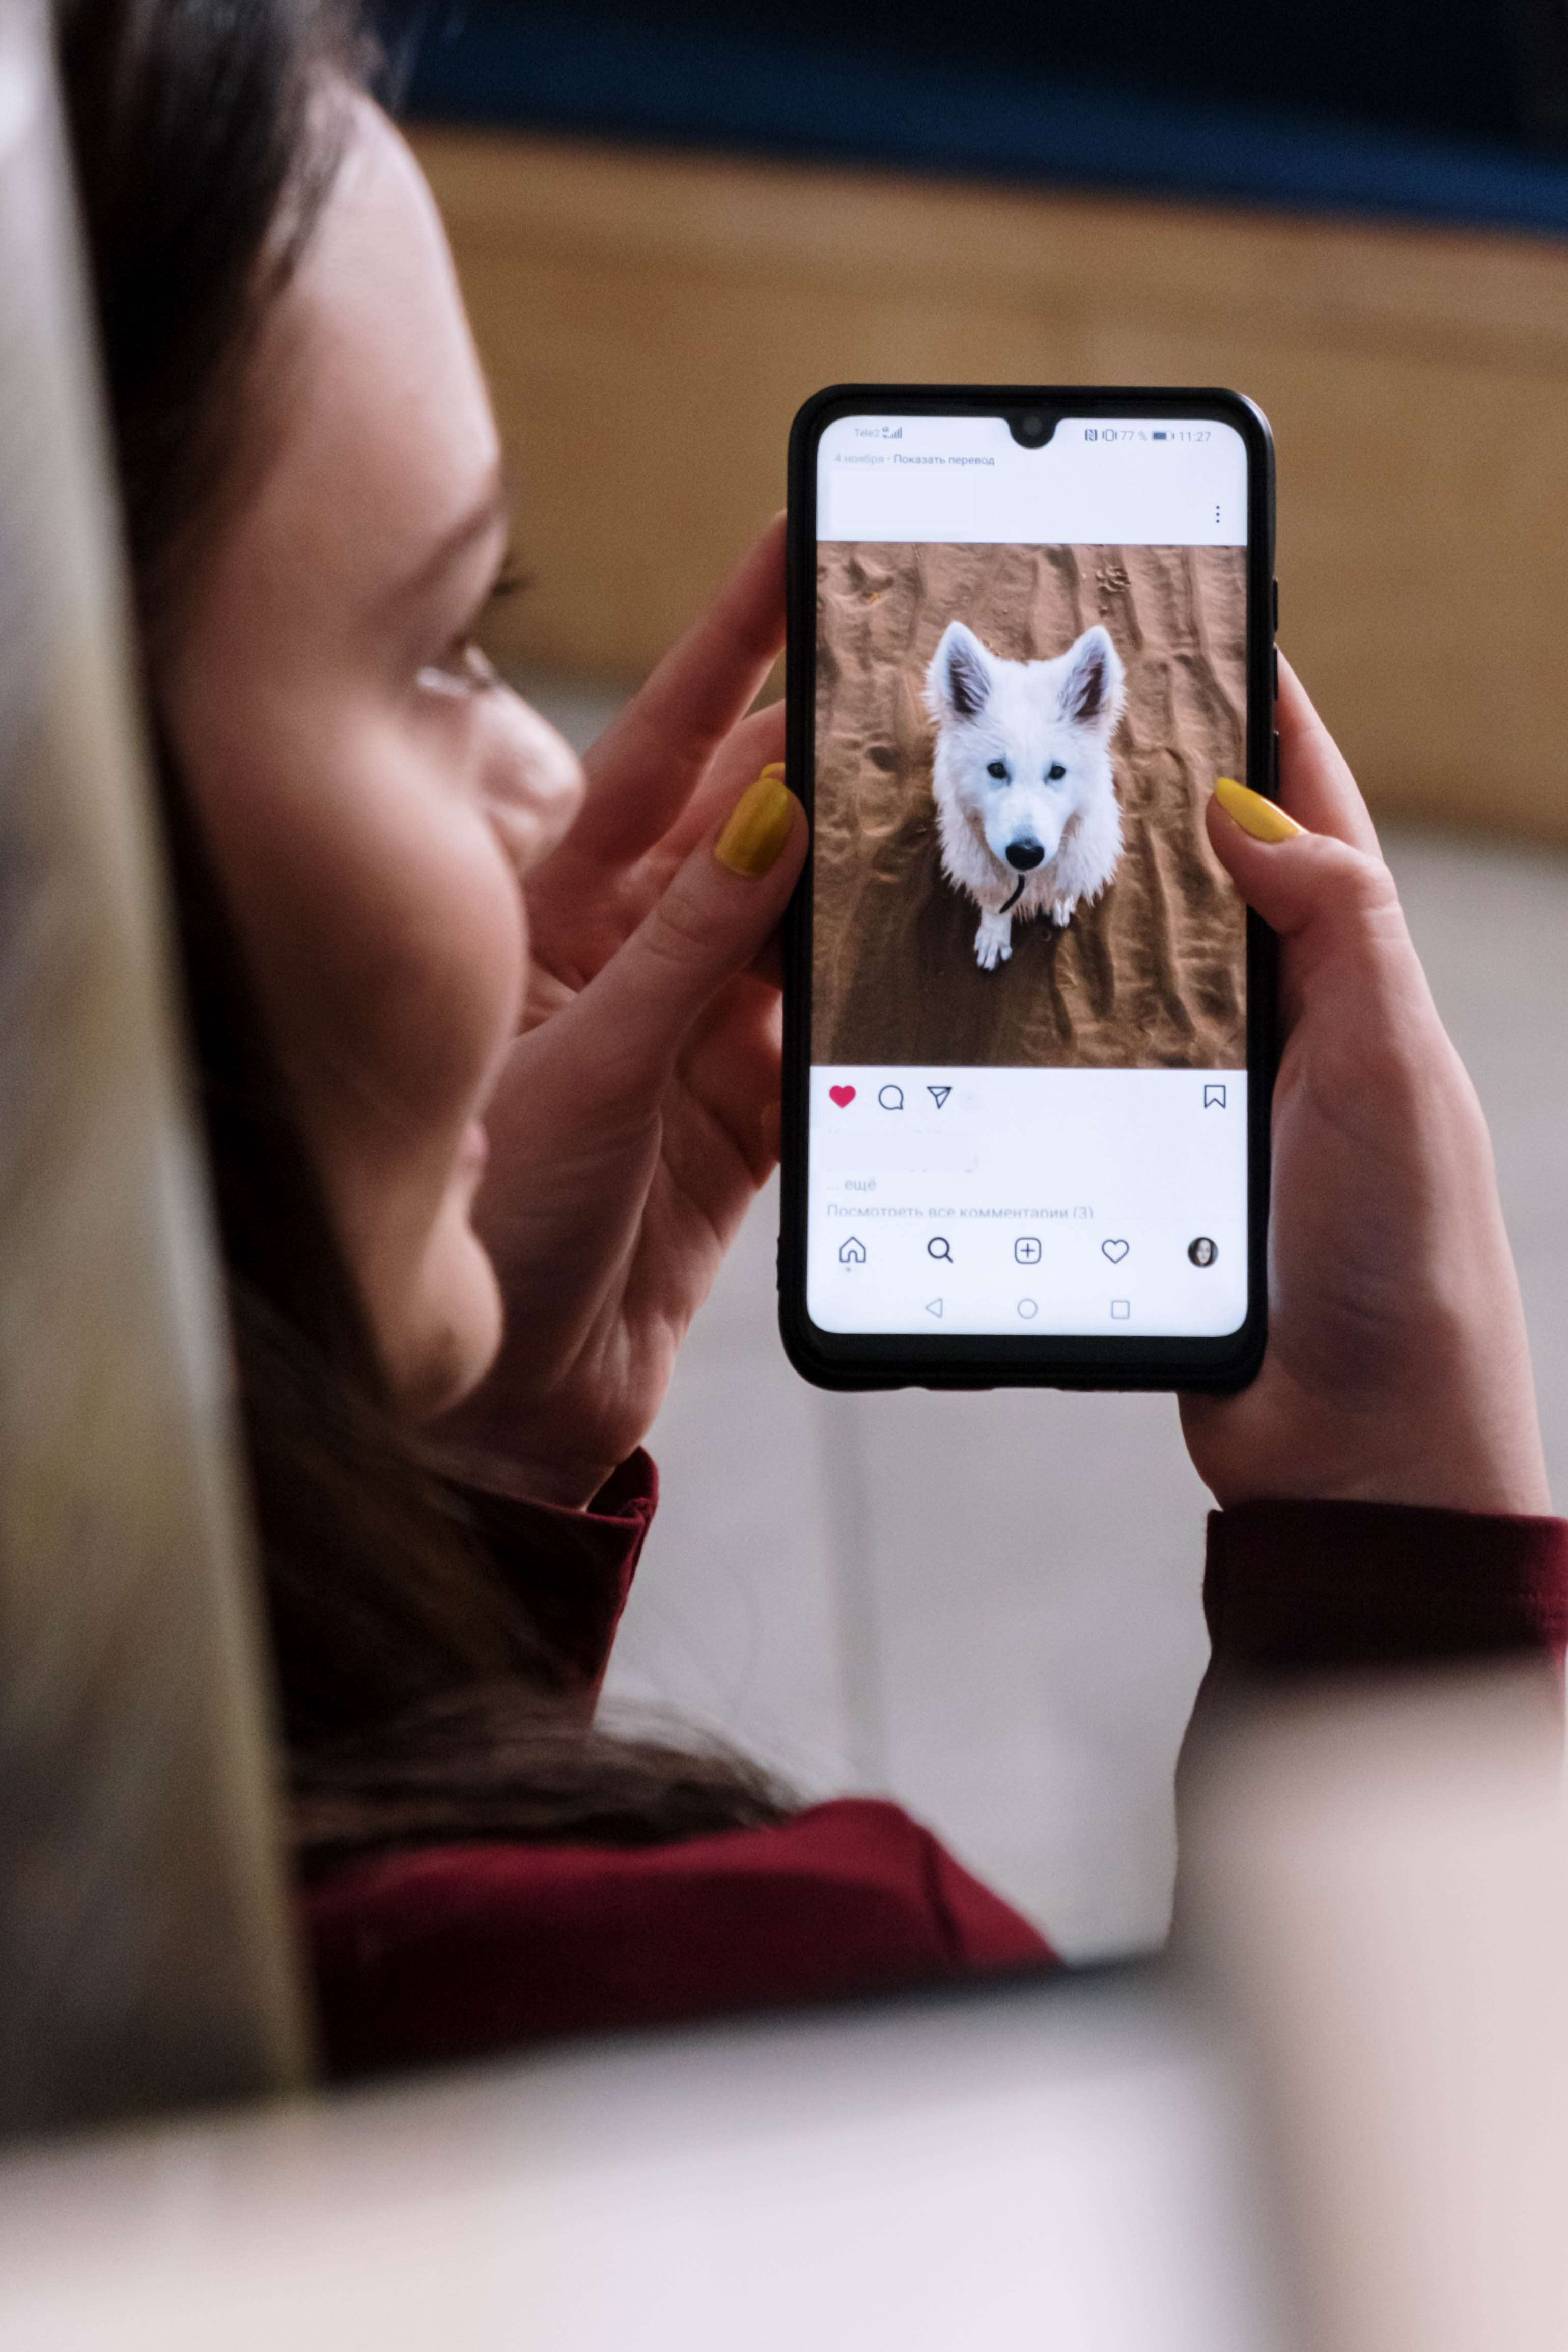 Photo of a girl on her Instagram account showing a dog photo